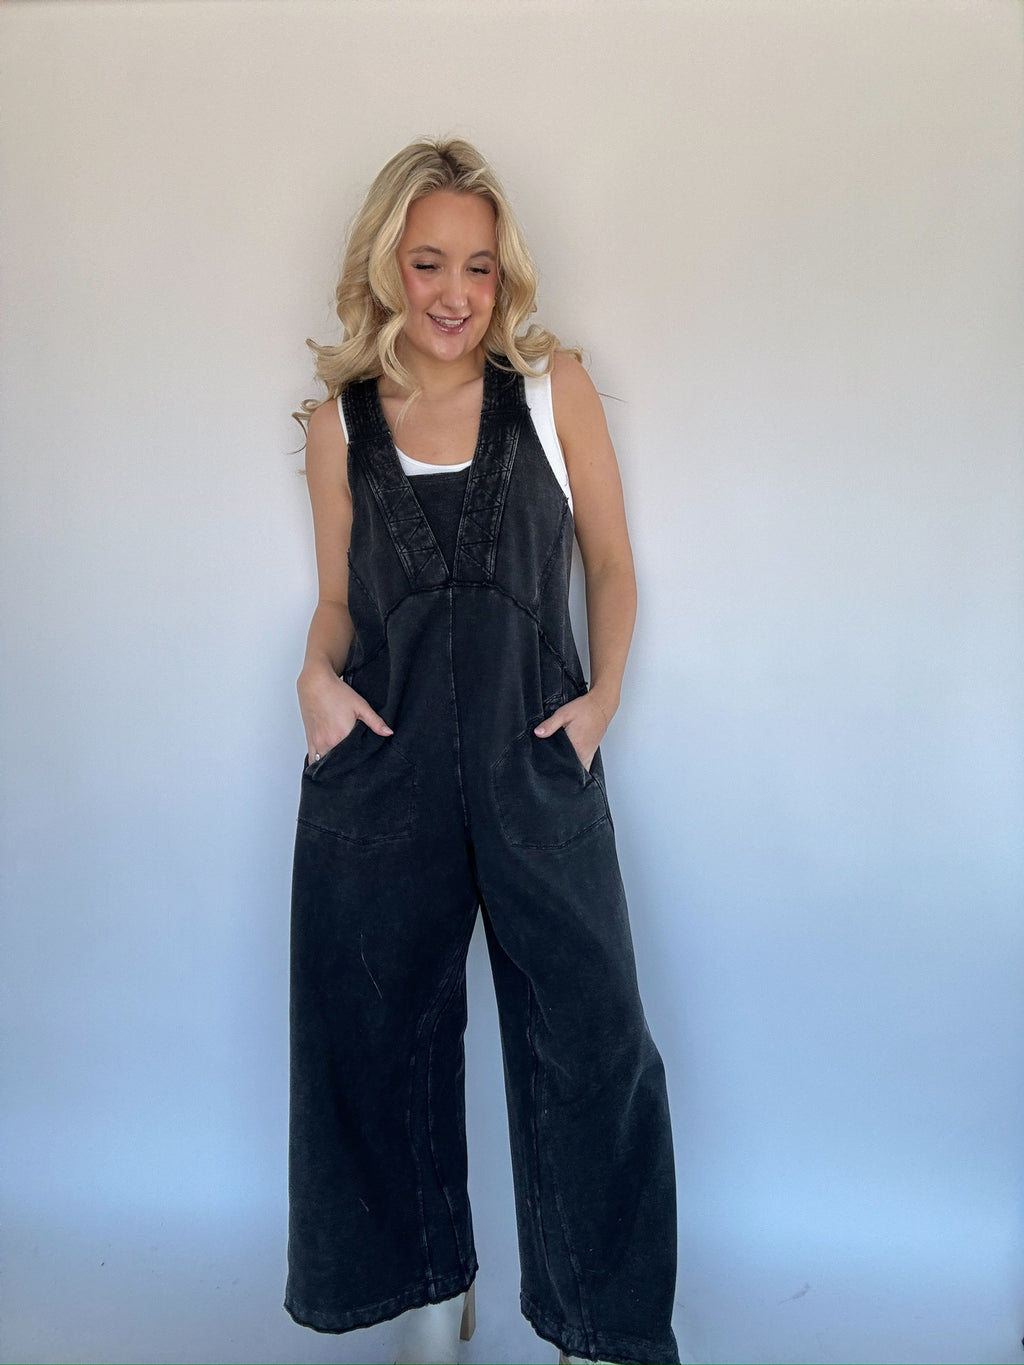 Replay Jumpsuit